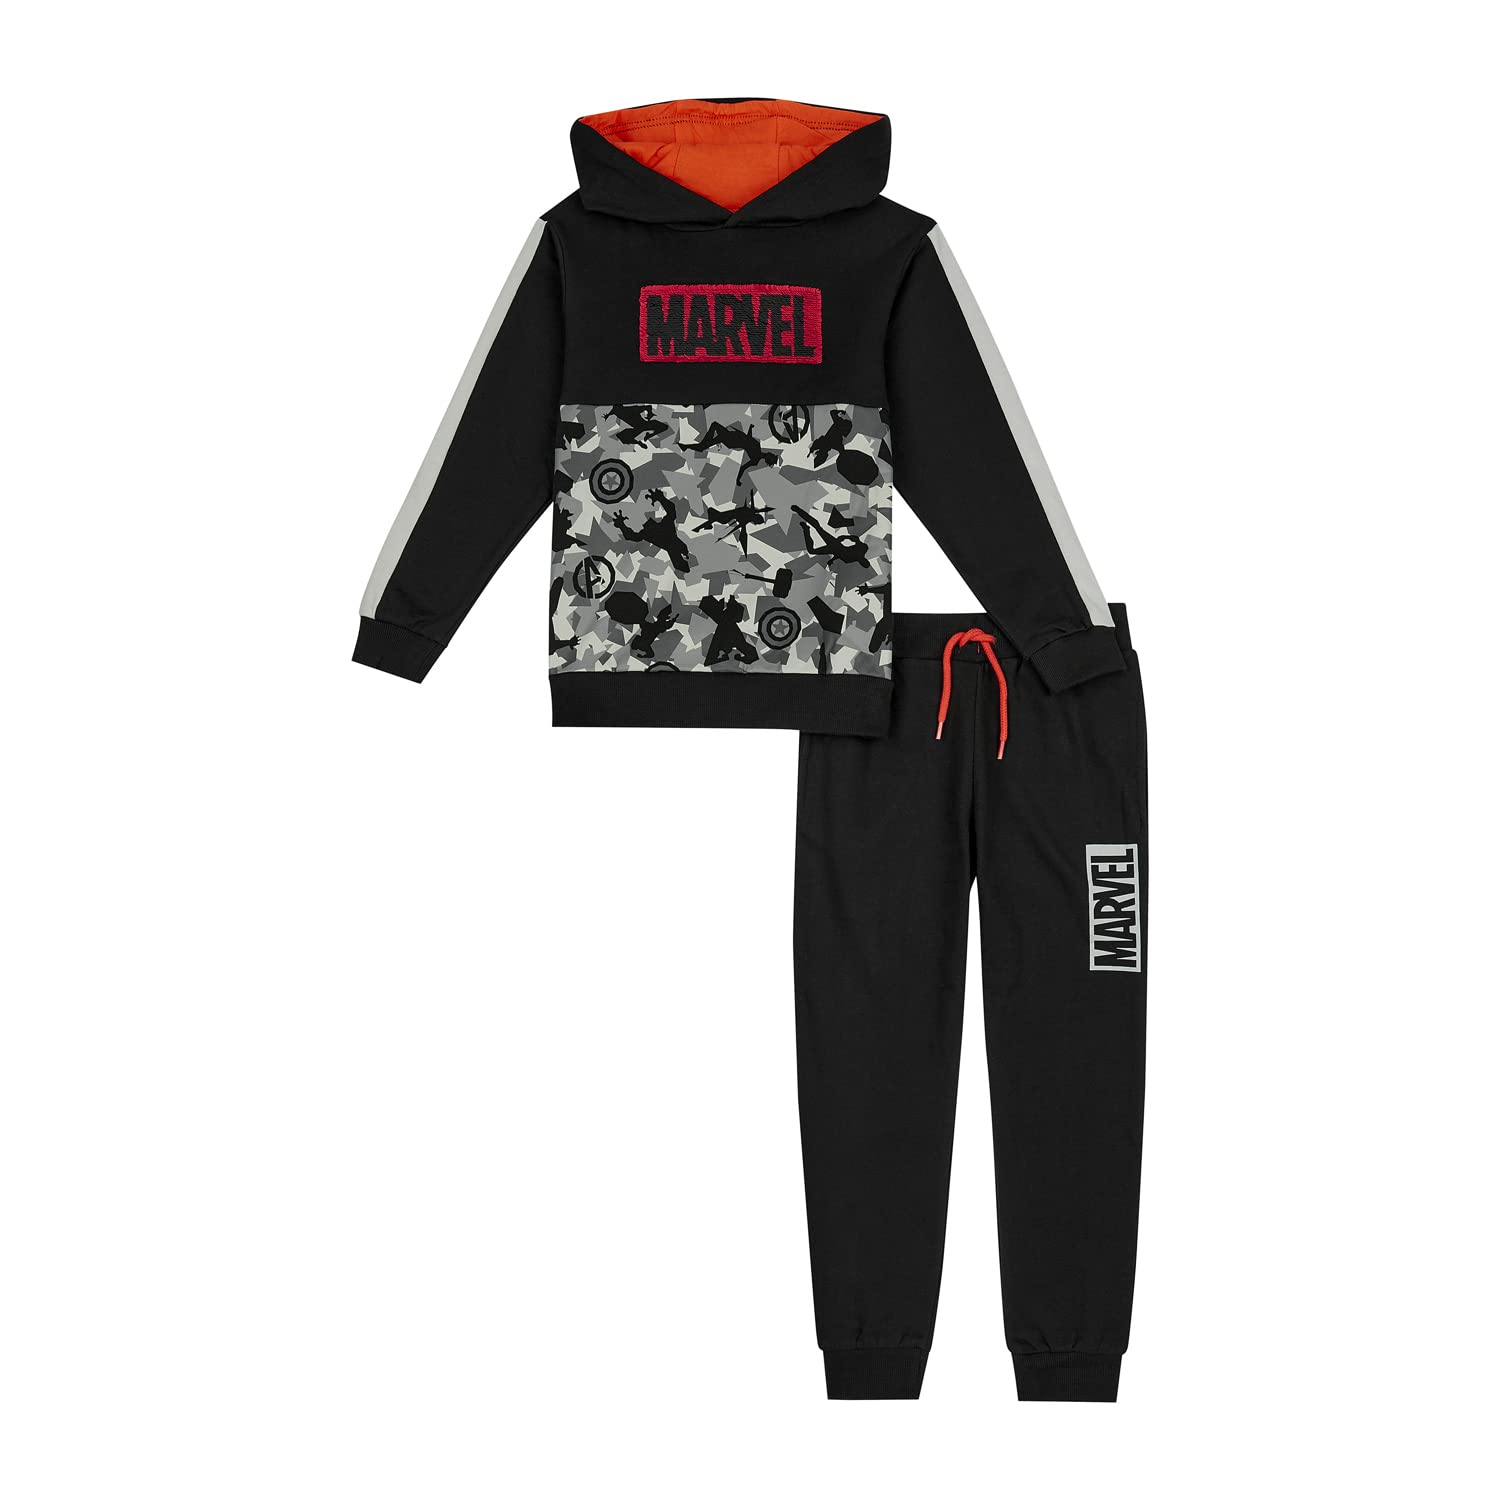 Marvel Boys Tracksuit, Boys Hoodie & Jogging Bottoms Set, Ages 4 to 10 Years Old